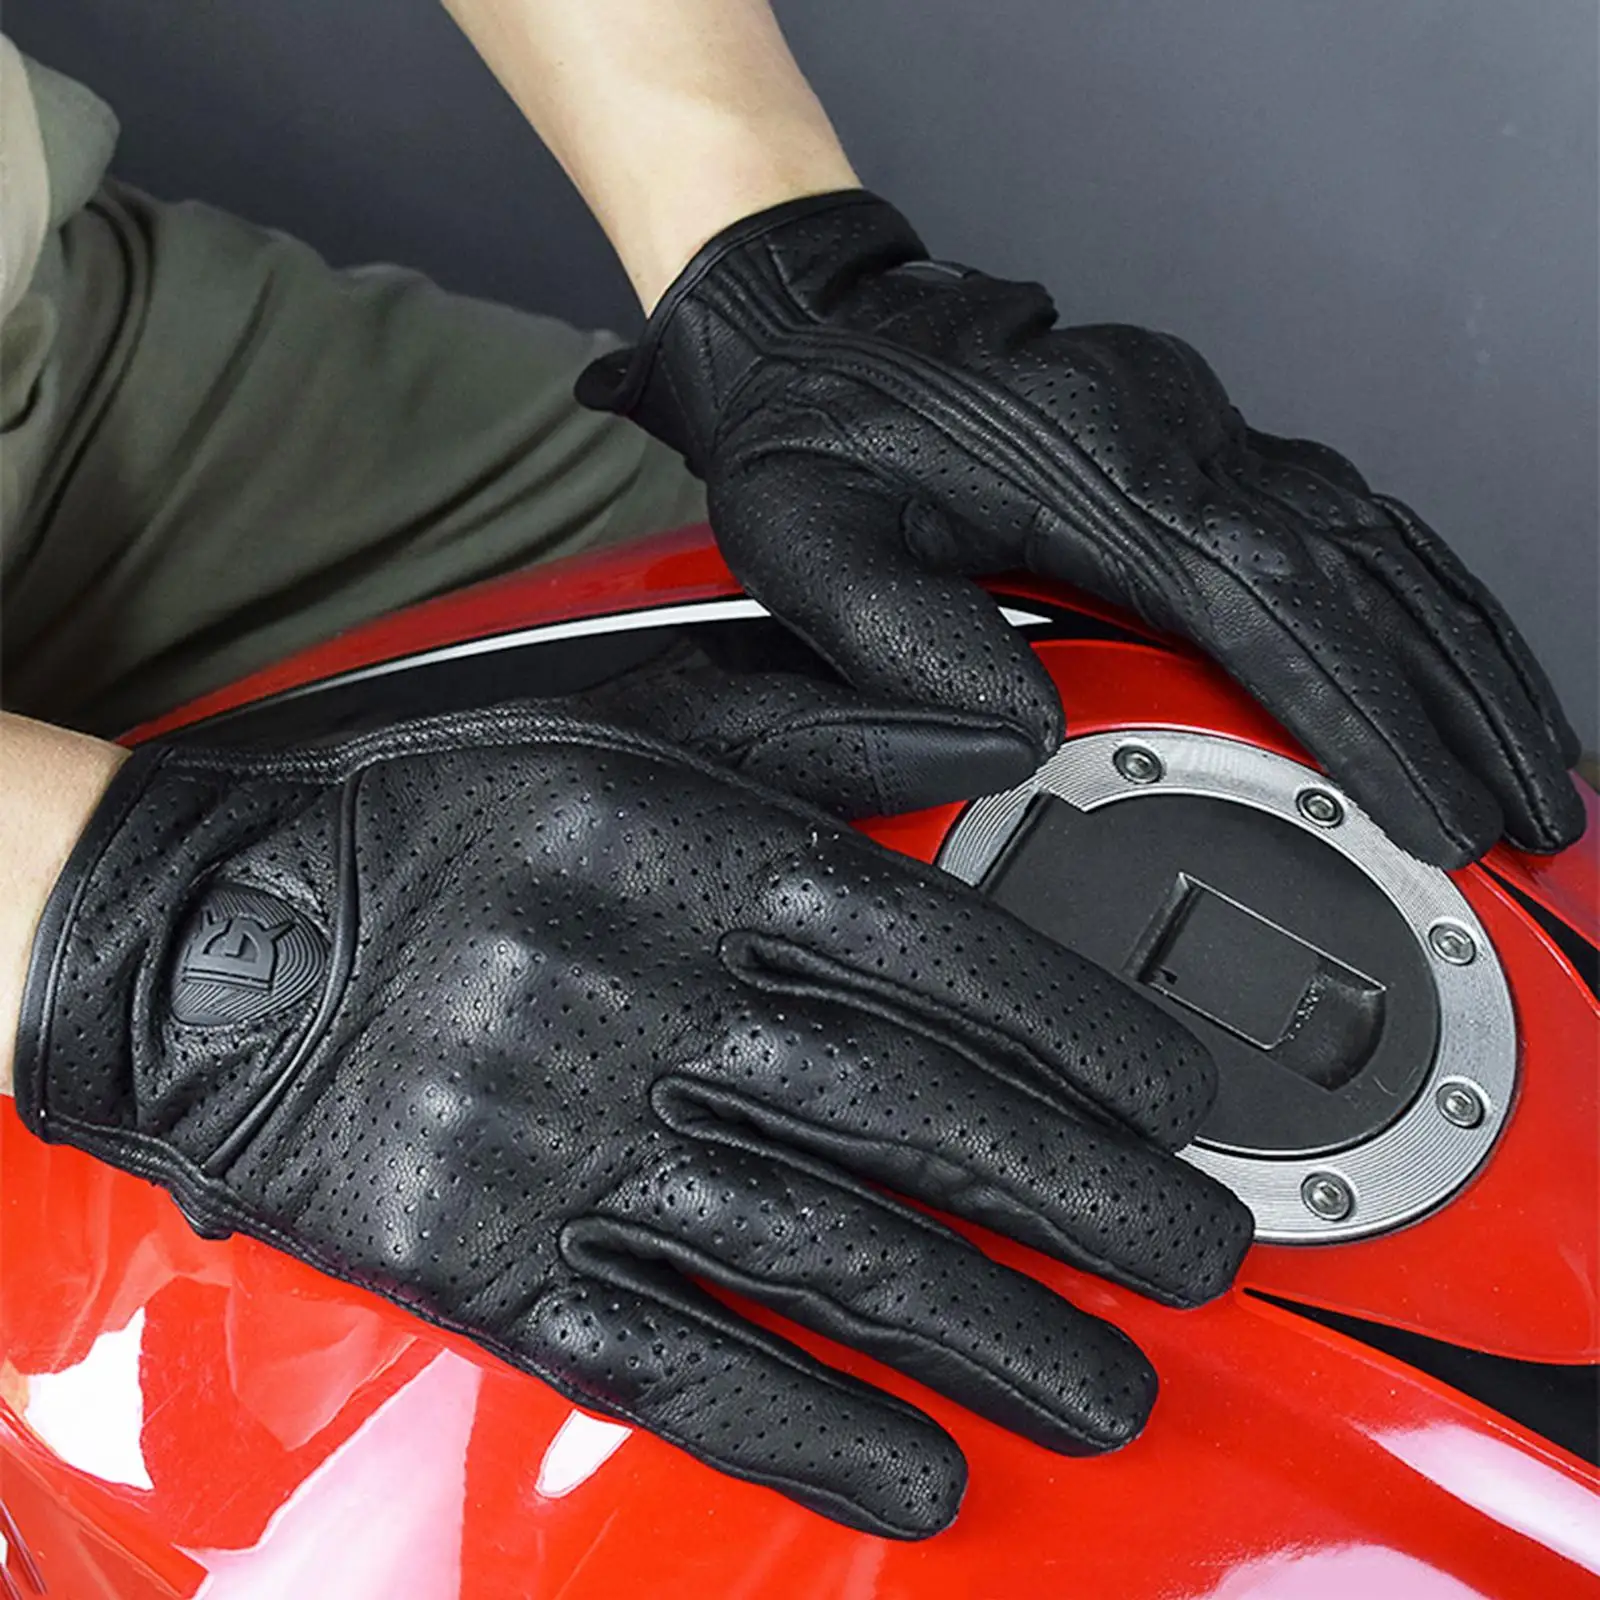 Full Finger Breathable Motorcycle Gloves Hard Knuckle Armored Leather Motorcycle Gloves Touchscreen